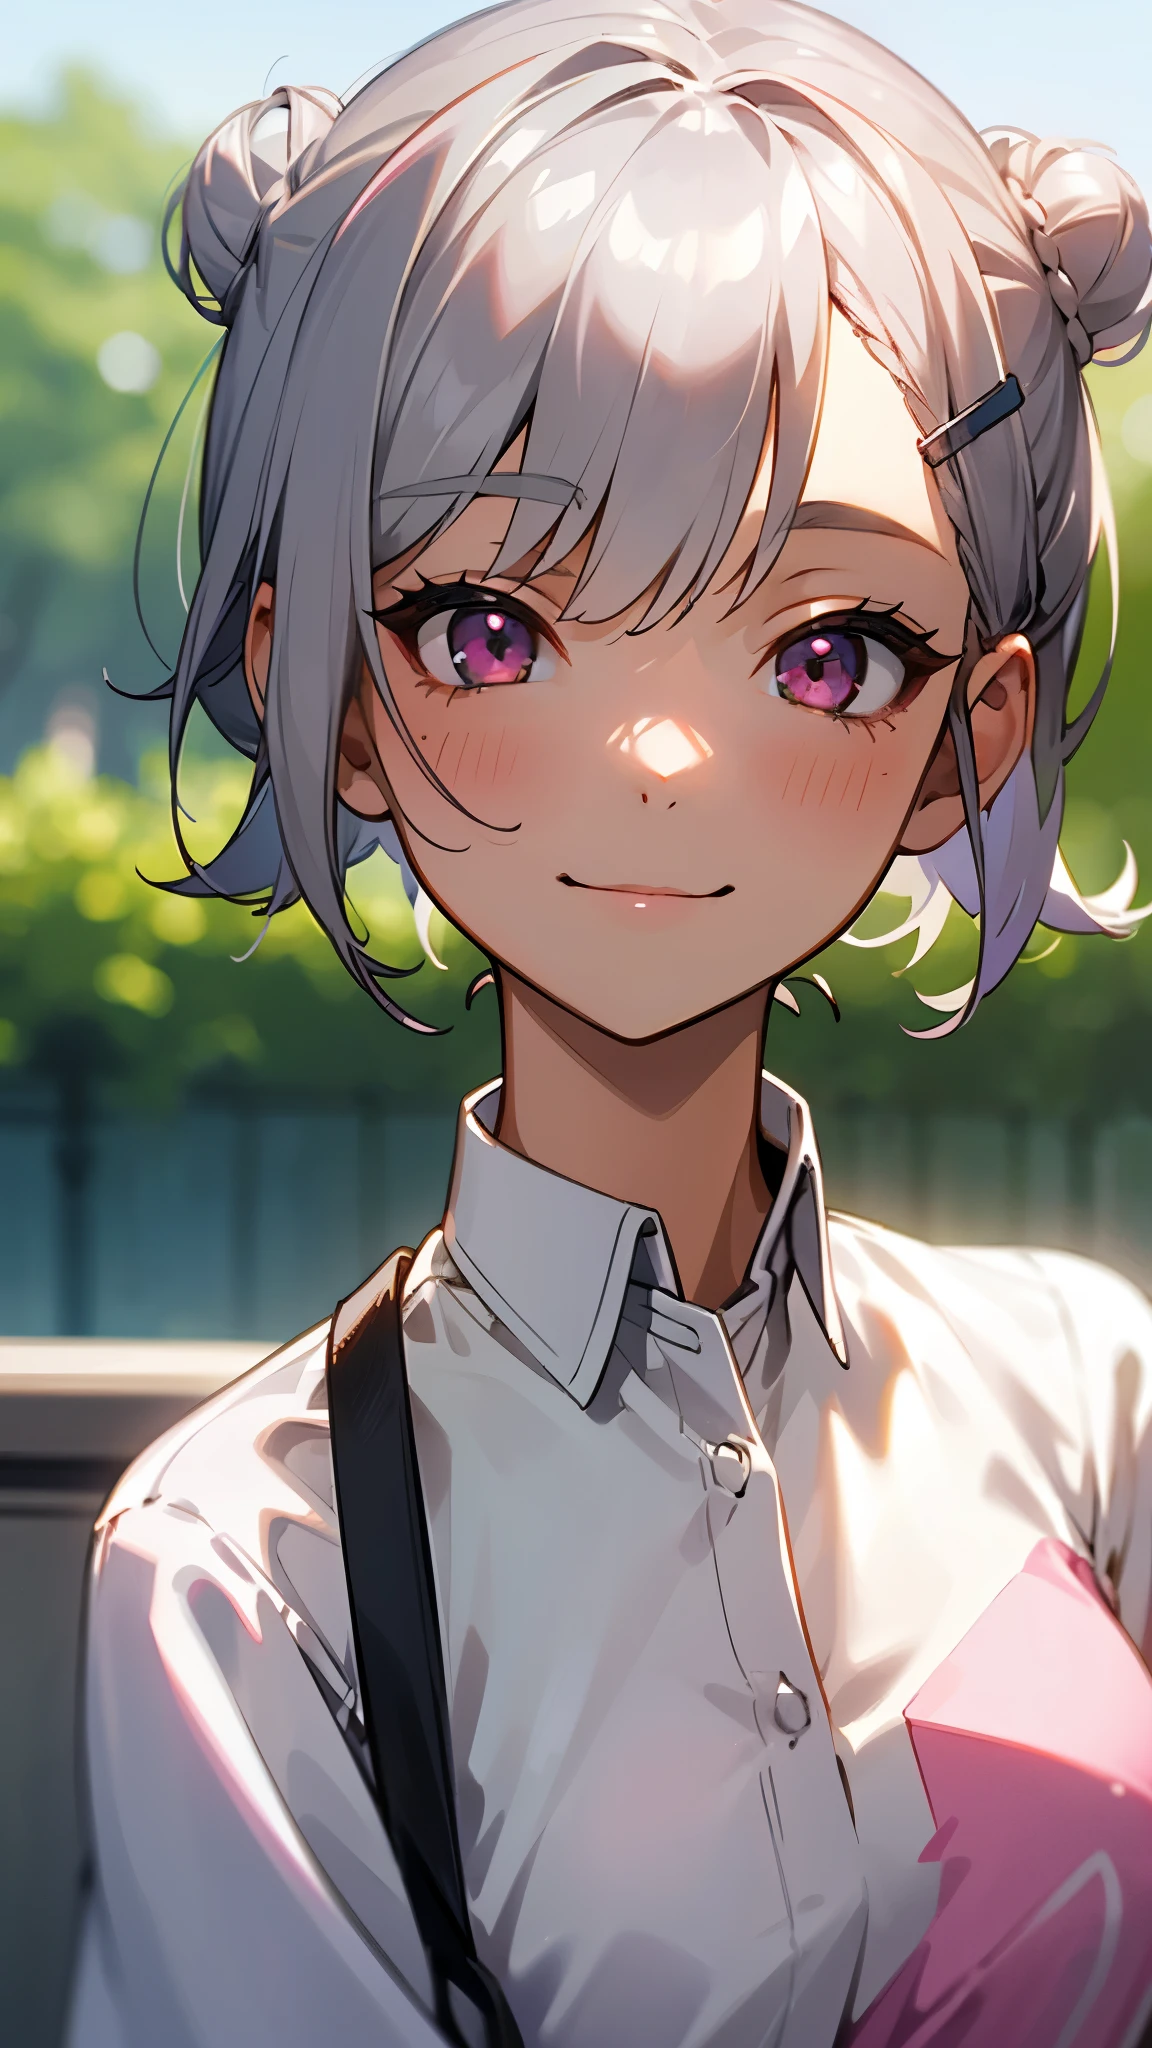 １girl、Short silver bob hair tied in a bun with a hair clip, Pink Eyes、smile、really like、Upper body close-up、Morning Cafe Terrace、Background blur, Written boundary depth